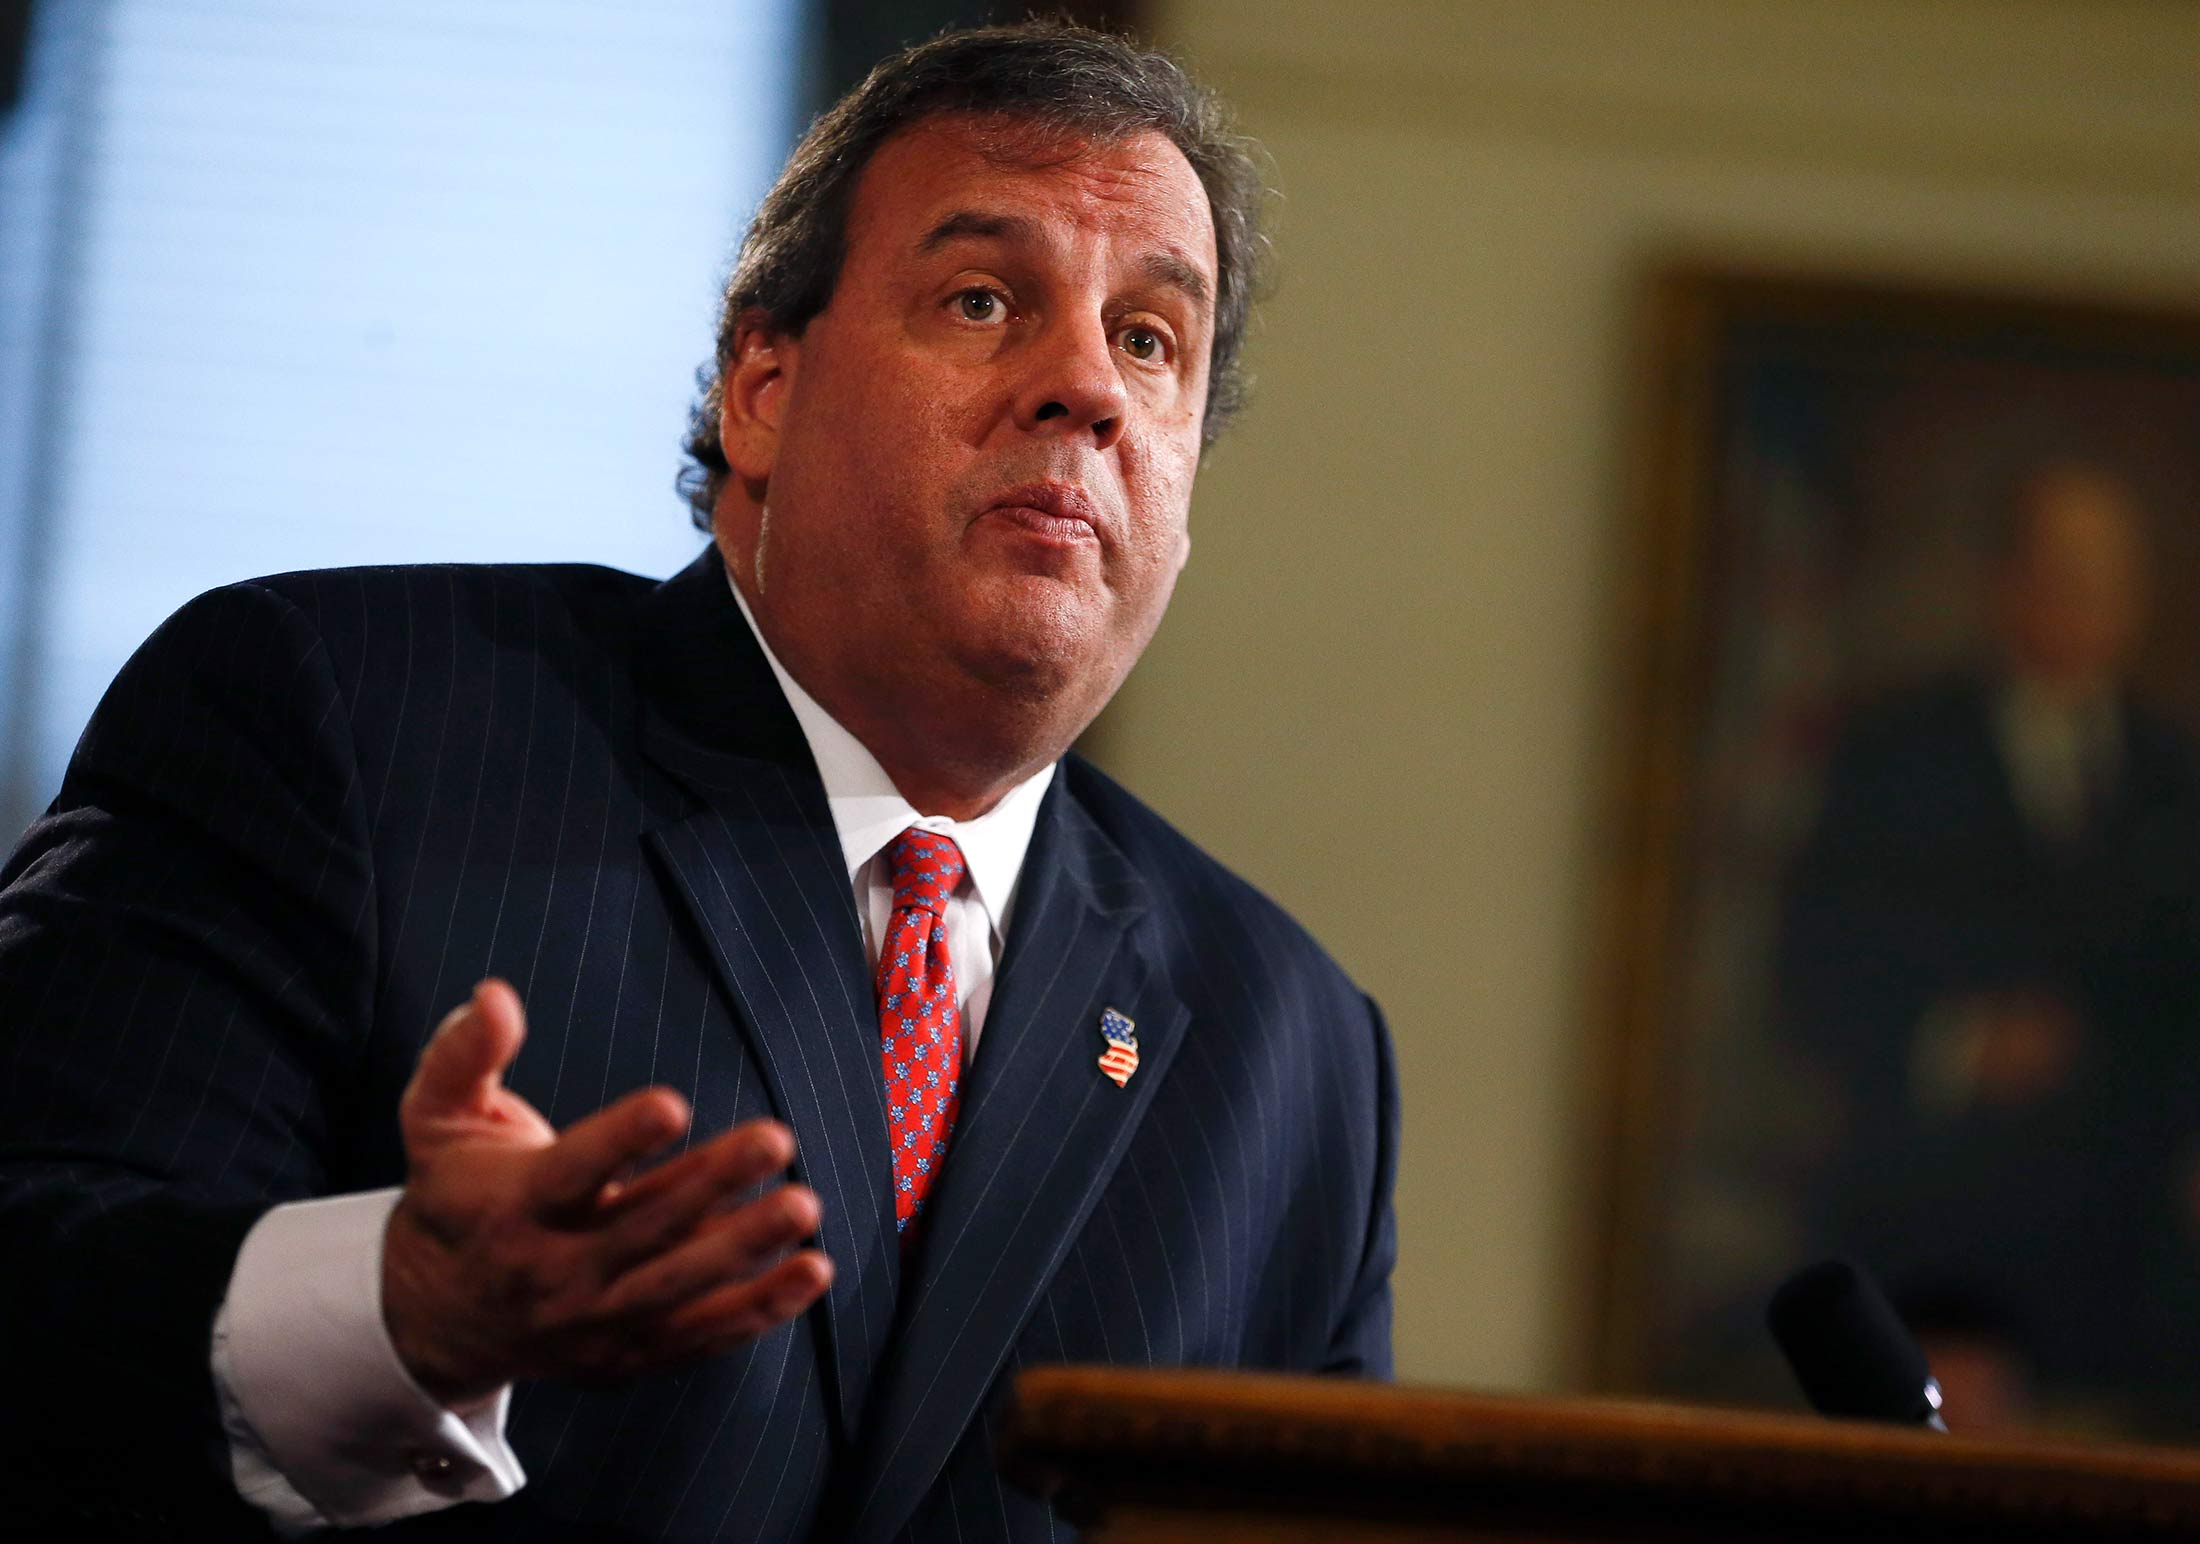 New Jersey Governor Chris Christie speaks about the so-called Bridgegate scandal during a news conference on Jan. 9, 2014, in Trenton, New Jersey.
